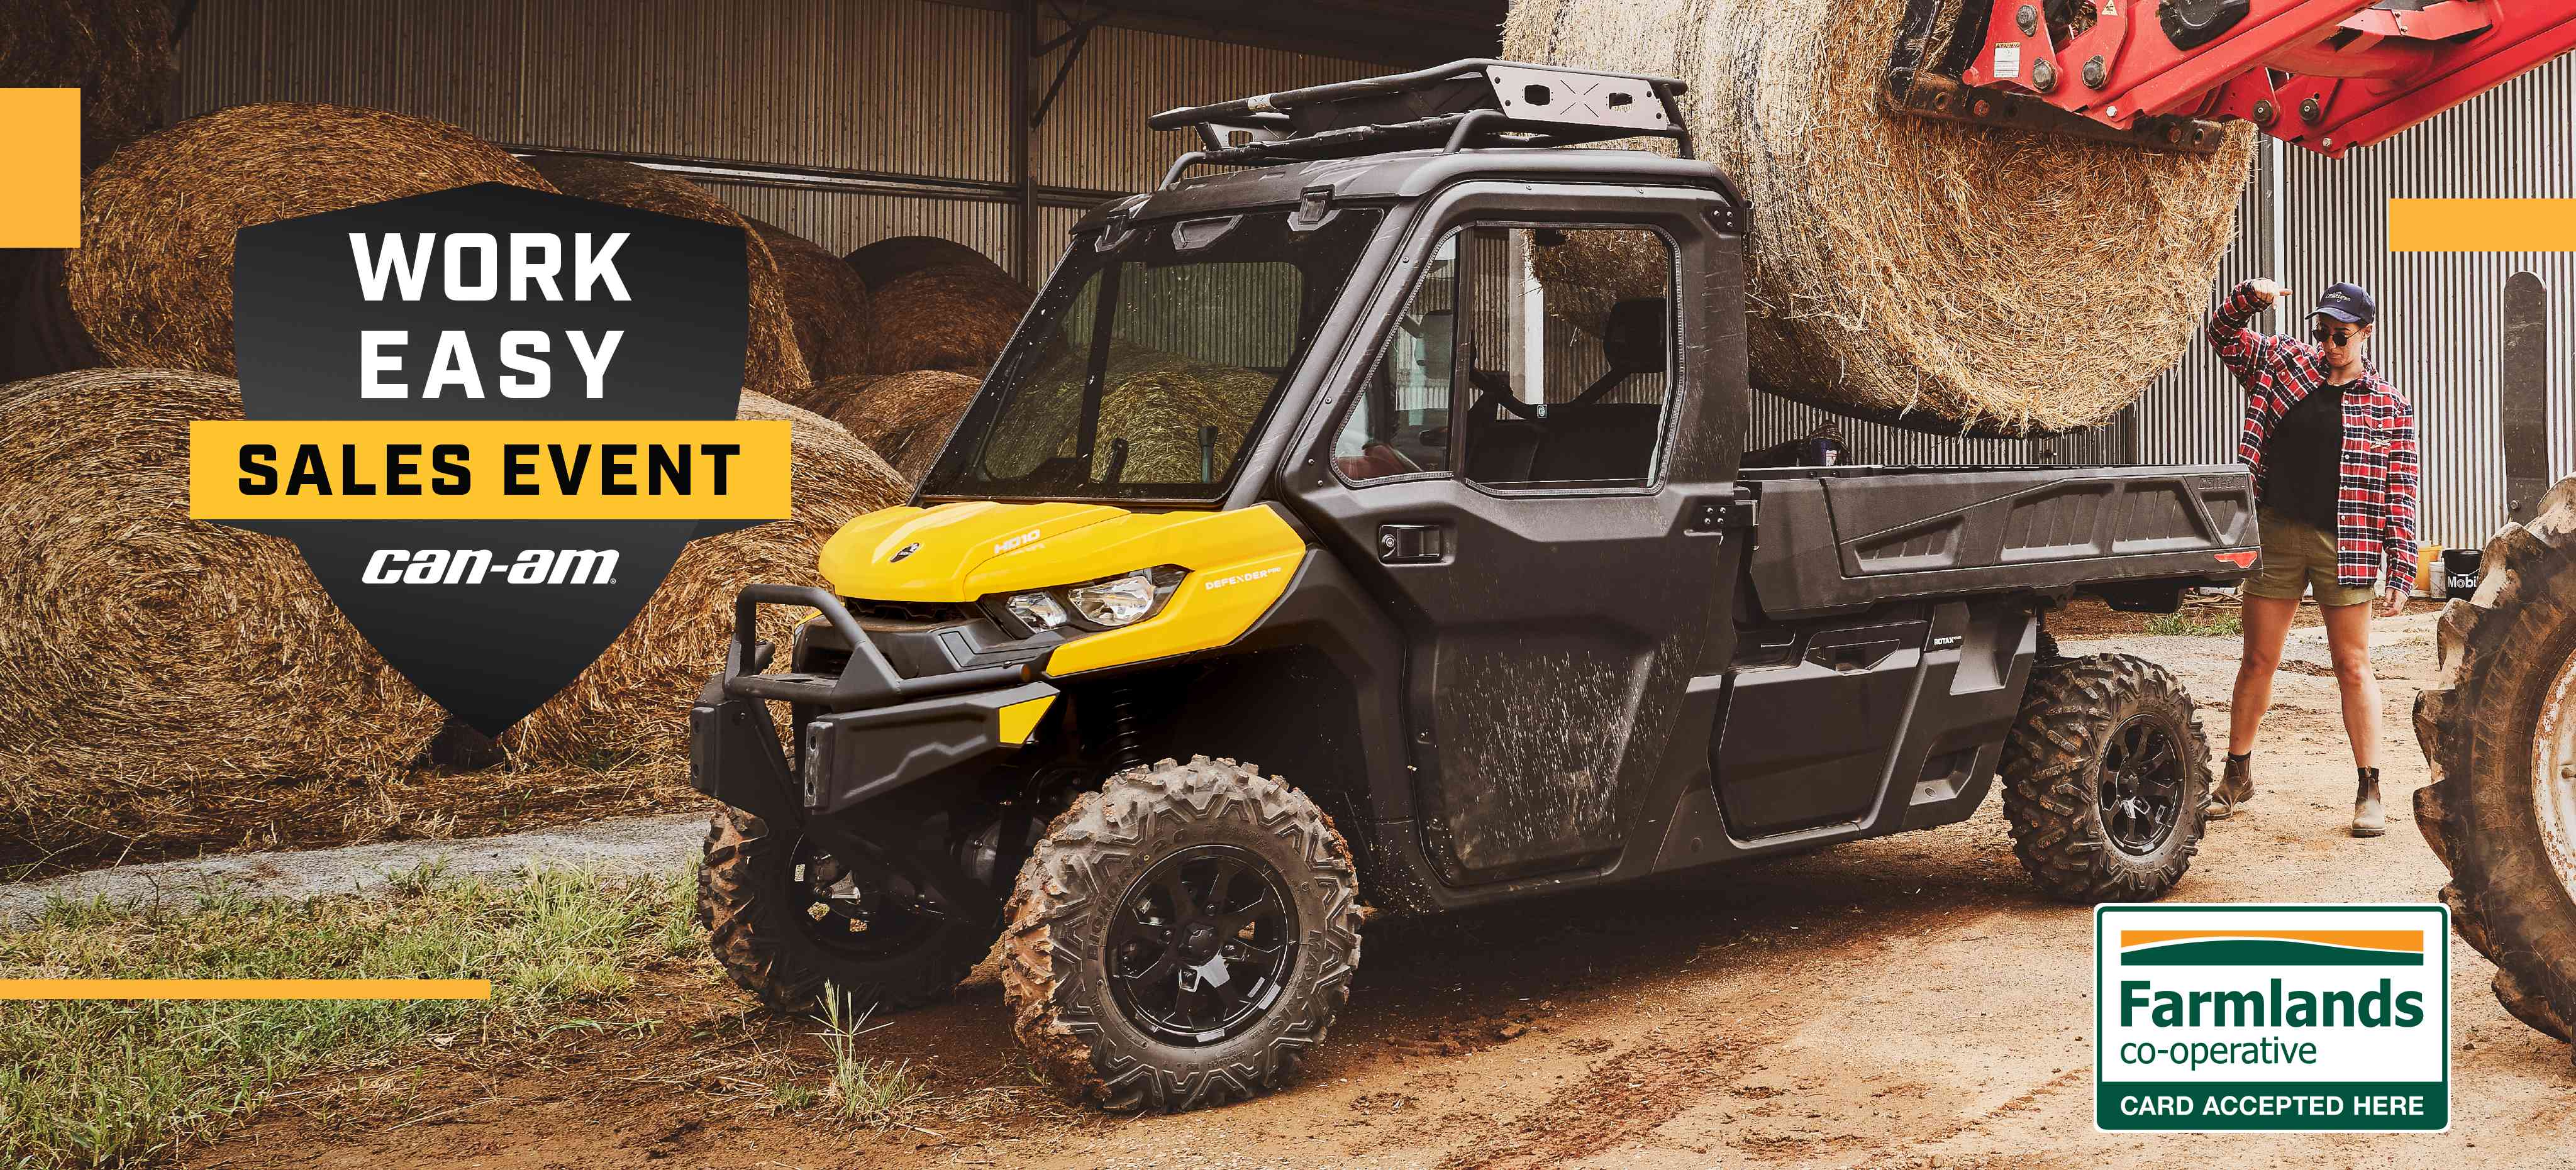 Can-Am Work Easy Sales Event NZ